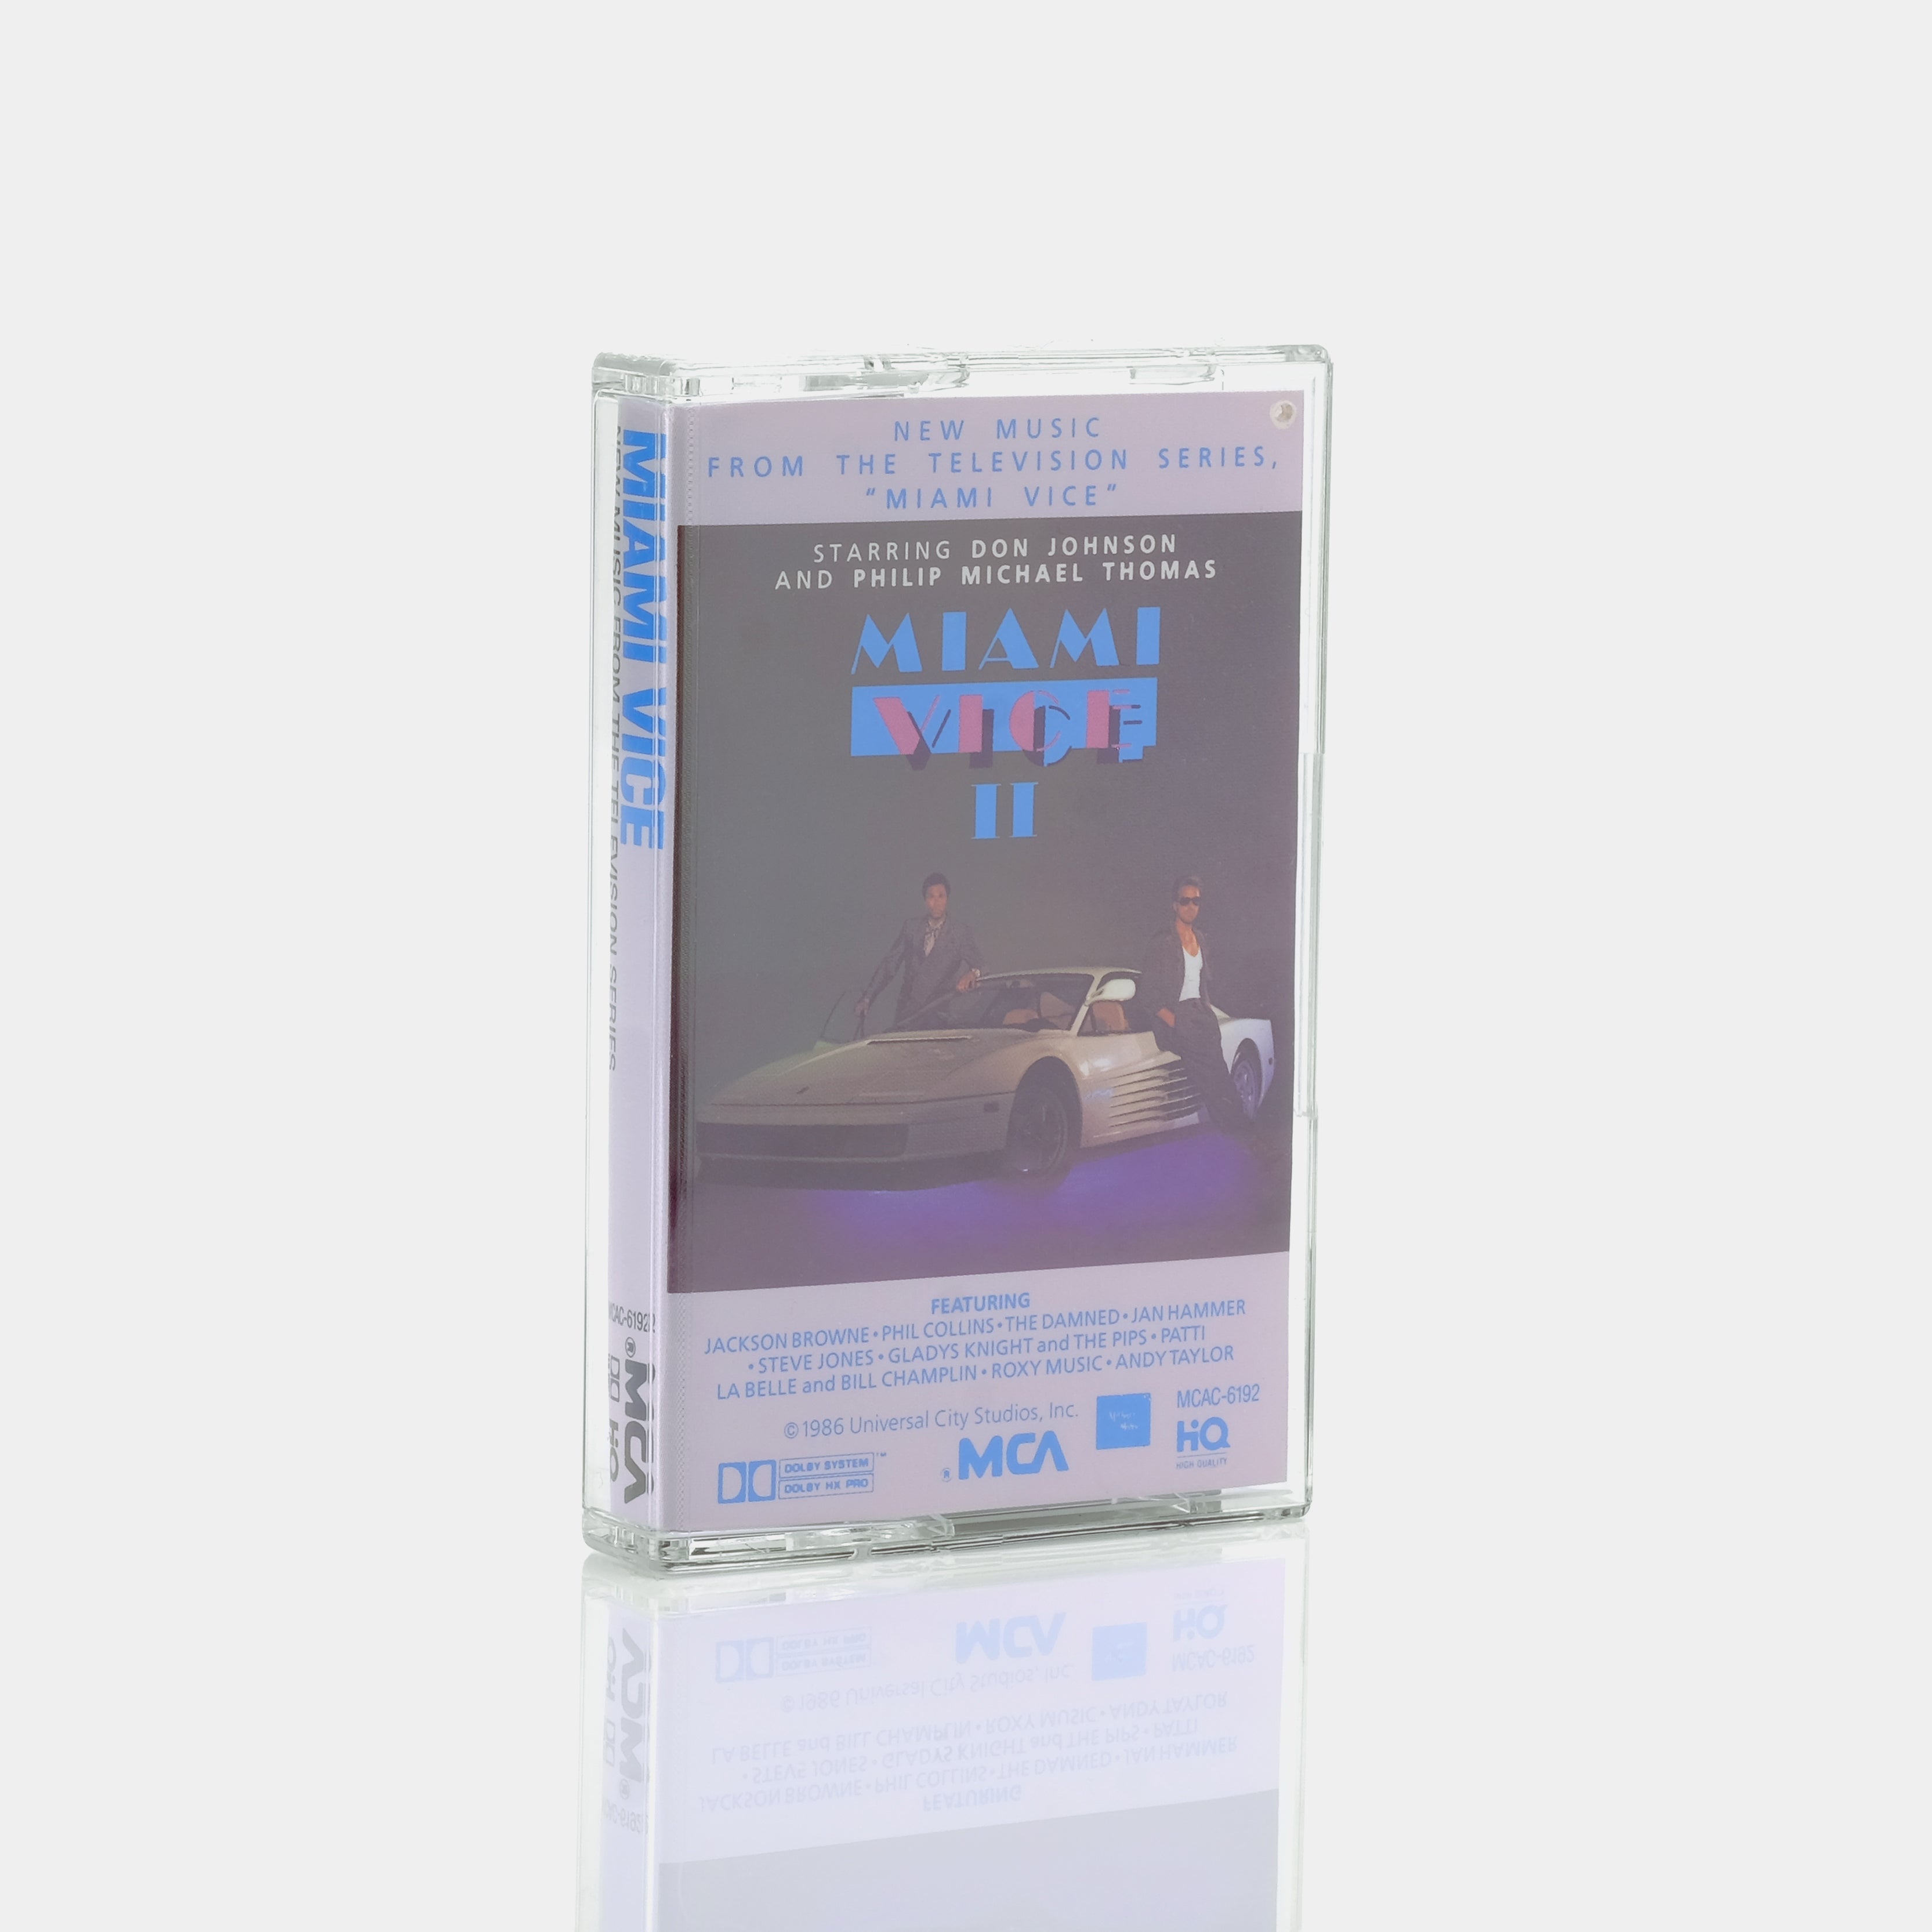 Miami Vice II (New Music From The Television Series) Cassette Tape